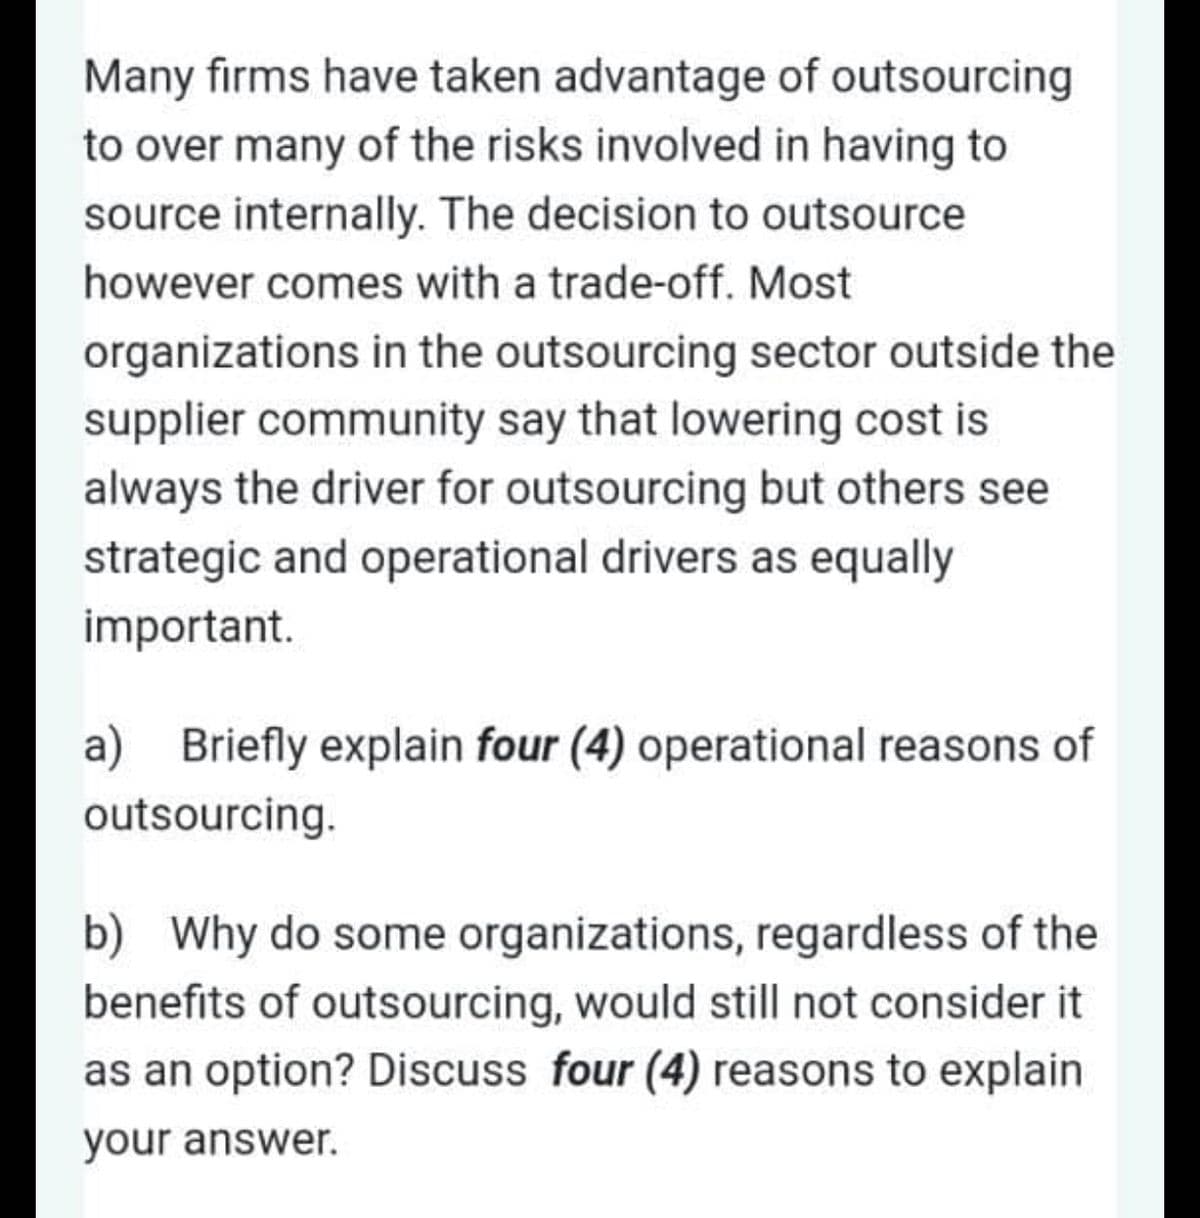 Many firms have taken advantage of outsourcing
to over many of the risks involved in having to
source internally. The decision to outsource
however comes with a trade-off. Most
organizations in the outsourcing sector outside the
supplier community say that lowering cost is
always the driver for outsourcing but others see
strategic and operational drivers as equally
important.
a) Briefly explain four (4) operational reasons of
outsourcing.
b) Why do some organizations, regardless of the
benefits of outsourcing, would still not consider it
as an option? Discuss four (4) reasons to explain
your answer.